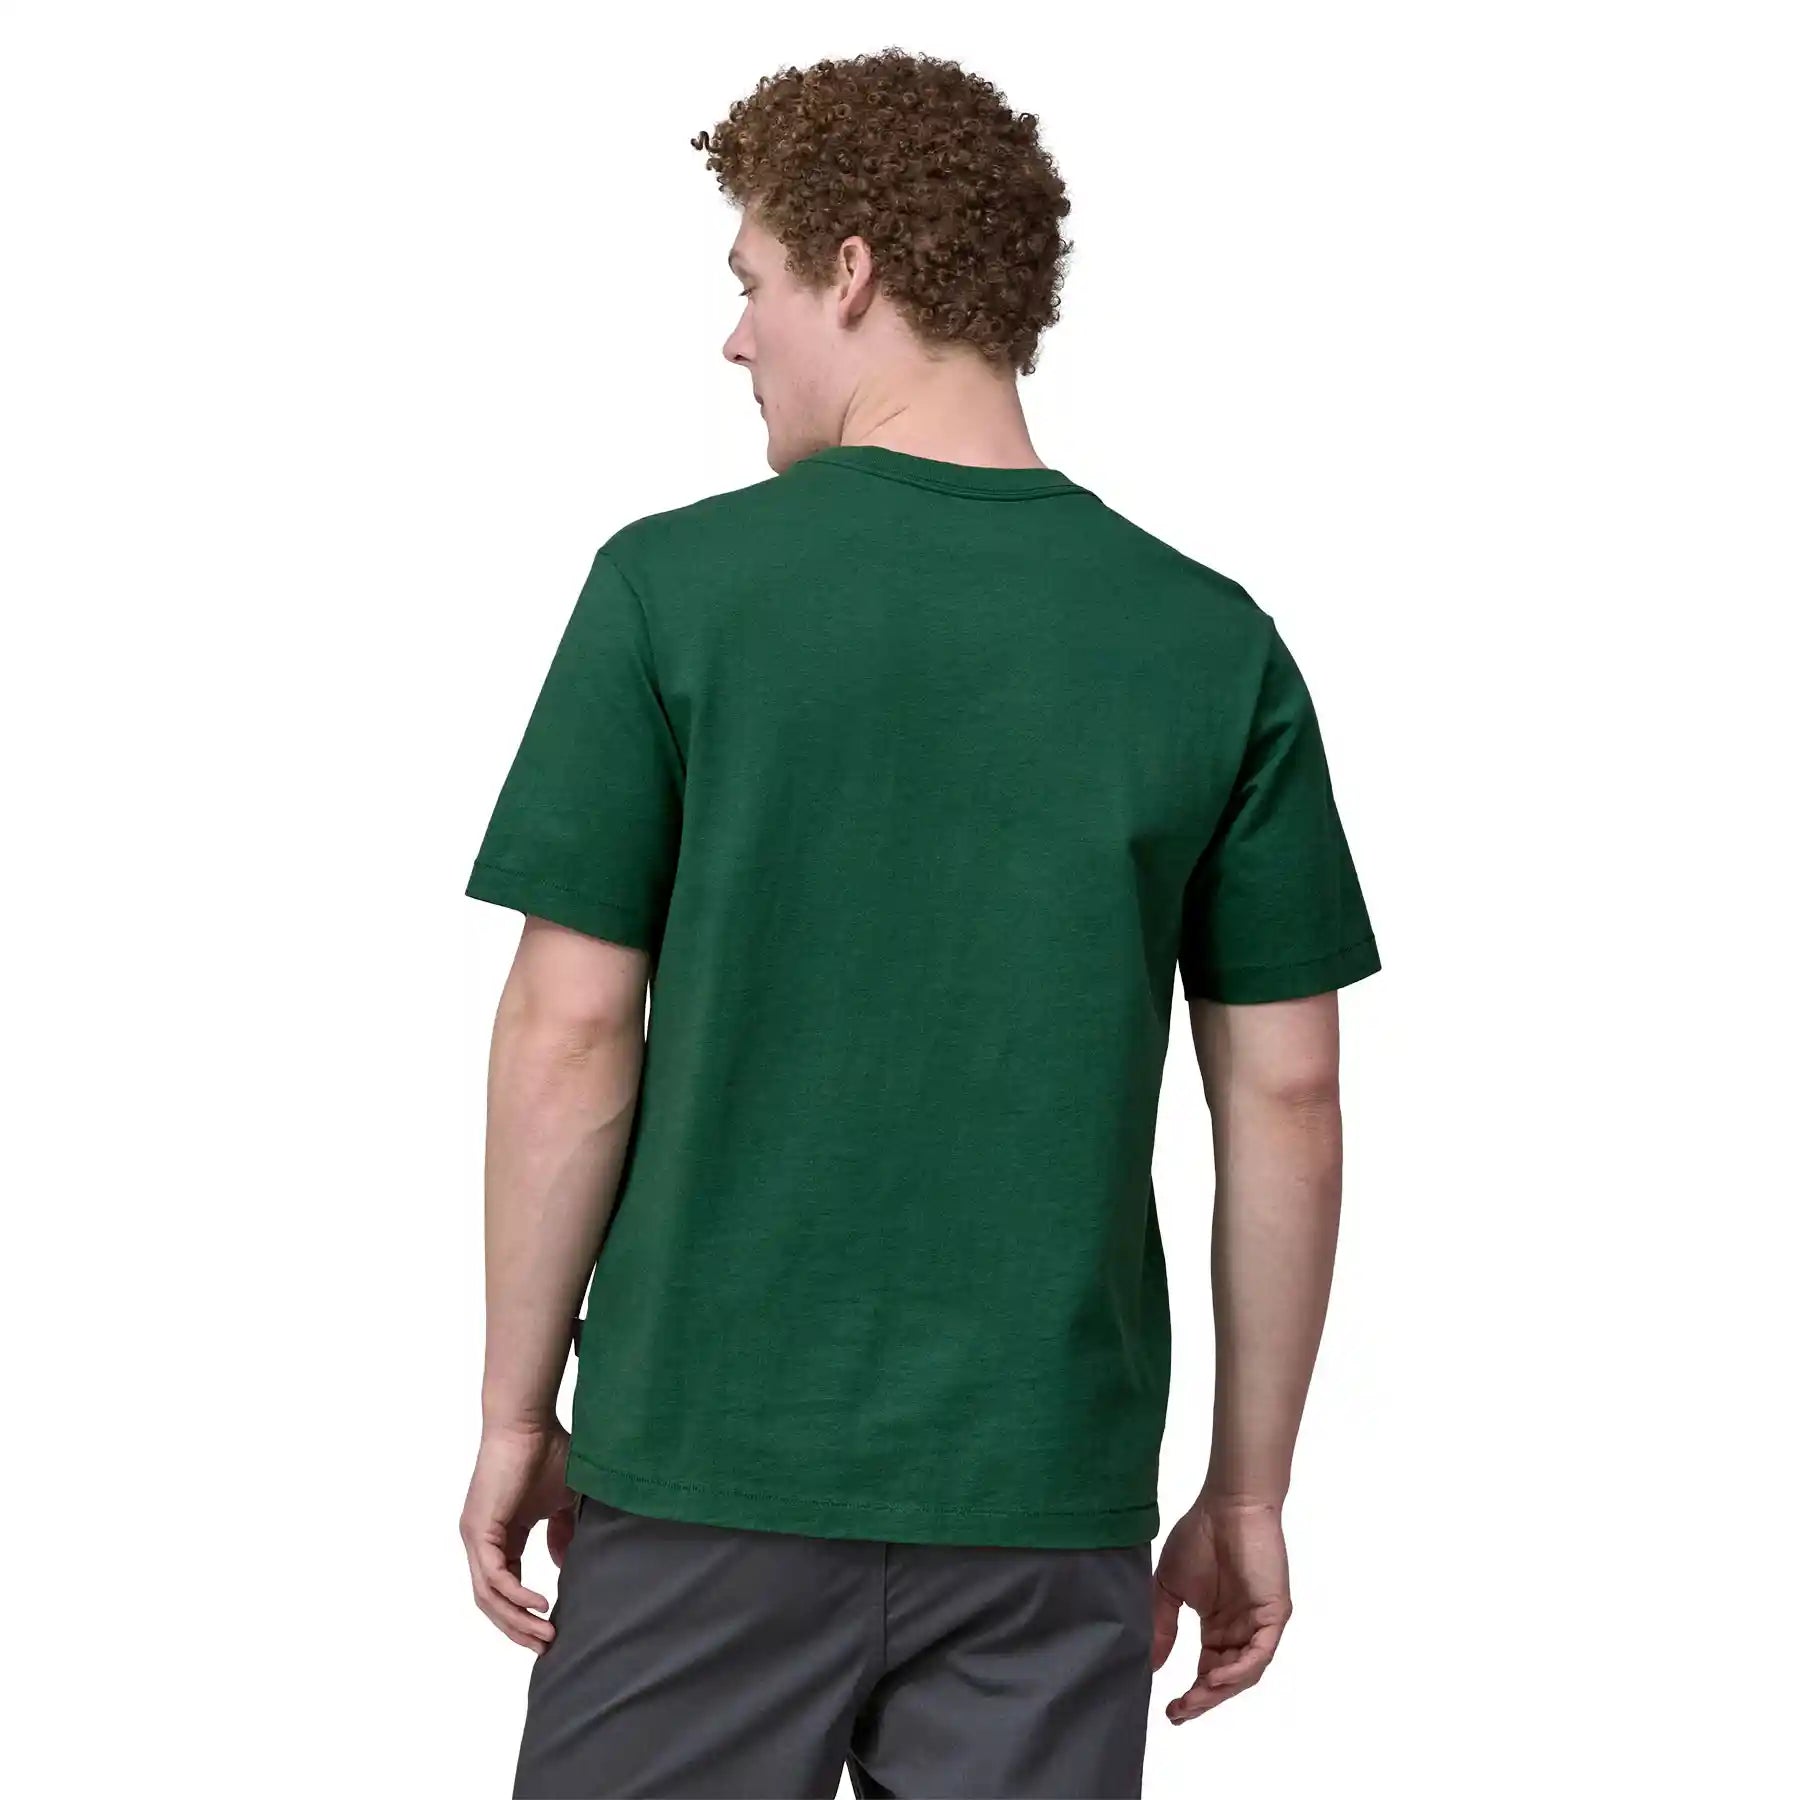 Patagonia Cotton In Conversion Midweight Pocket Tee, conifer green,  52010-cifg – Norwood